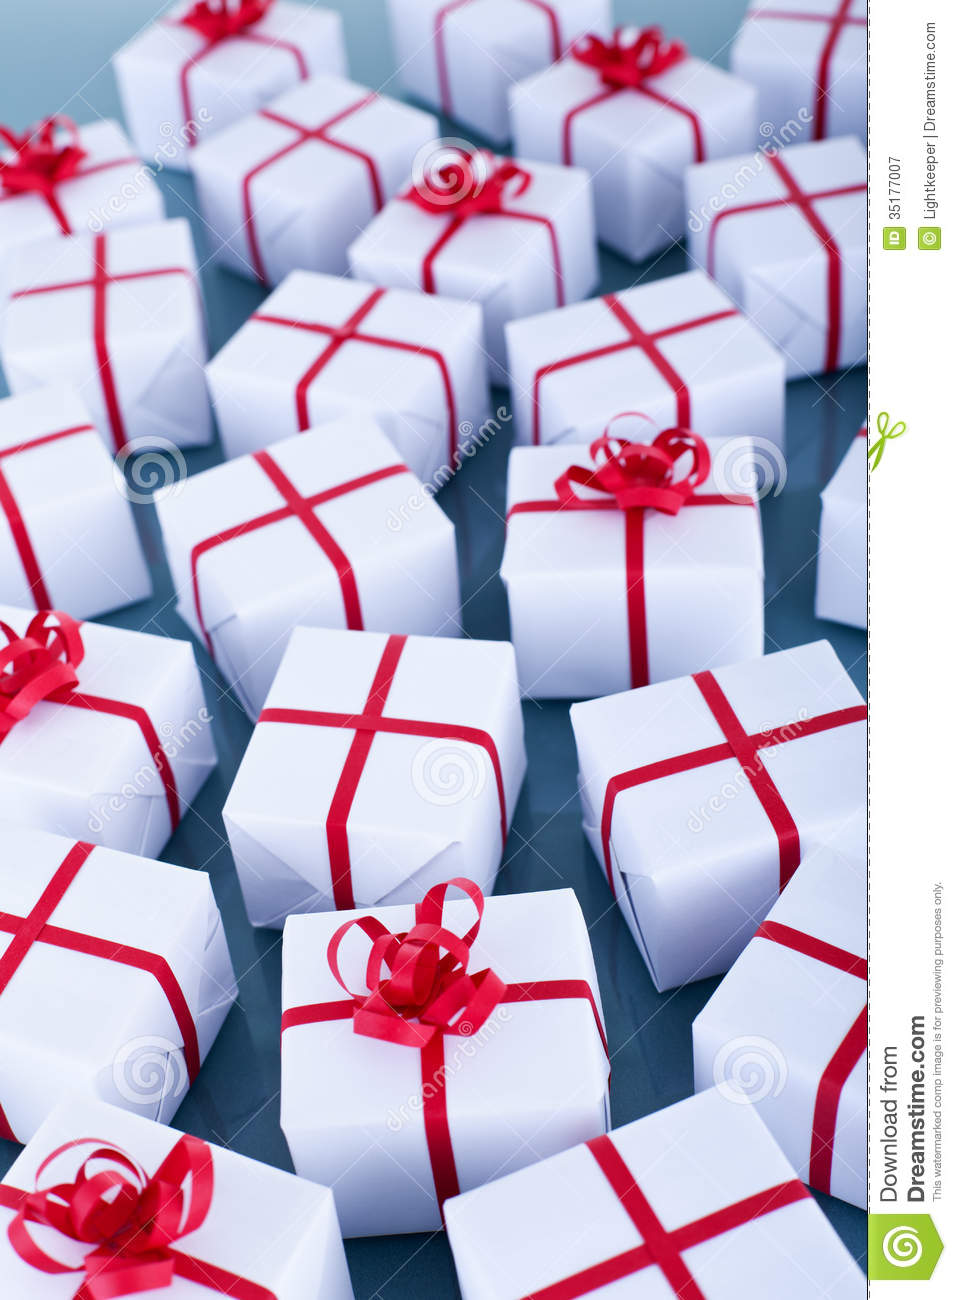 Lots Of Christmas Presents On Reflective Surface Royalty Free Stock    